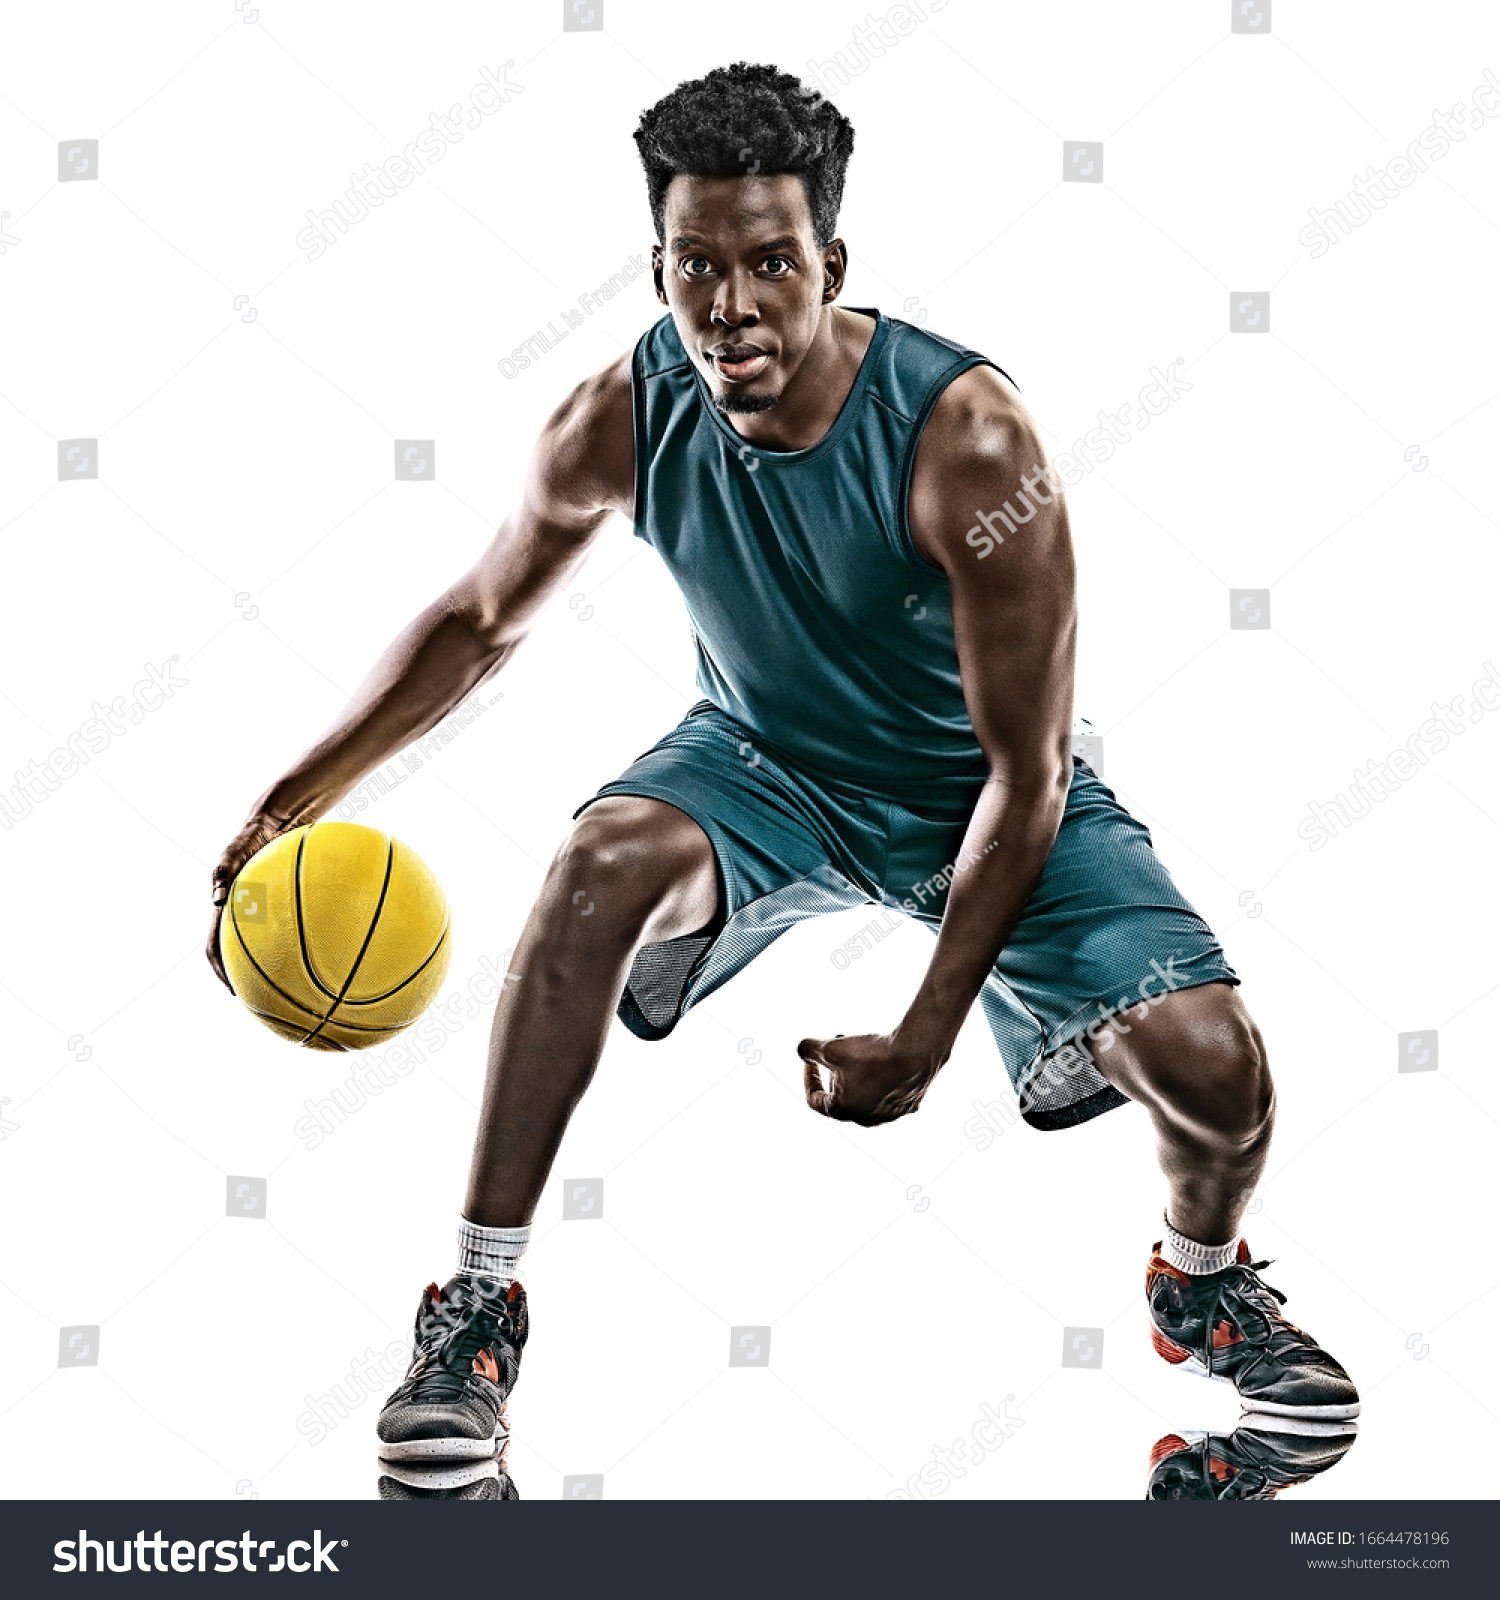 one african basketball player young man in studio isolated on white background #1664478196